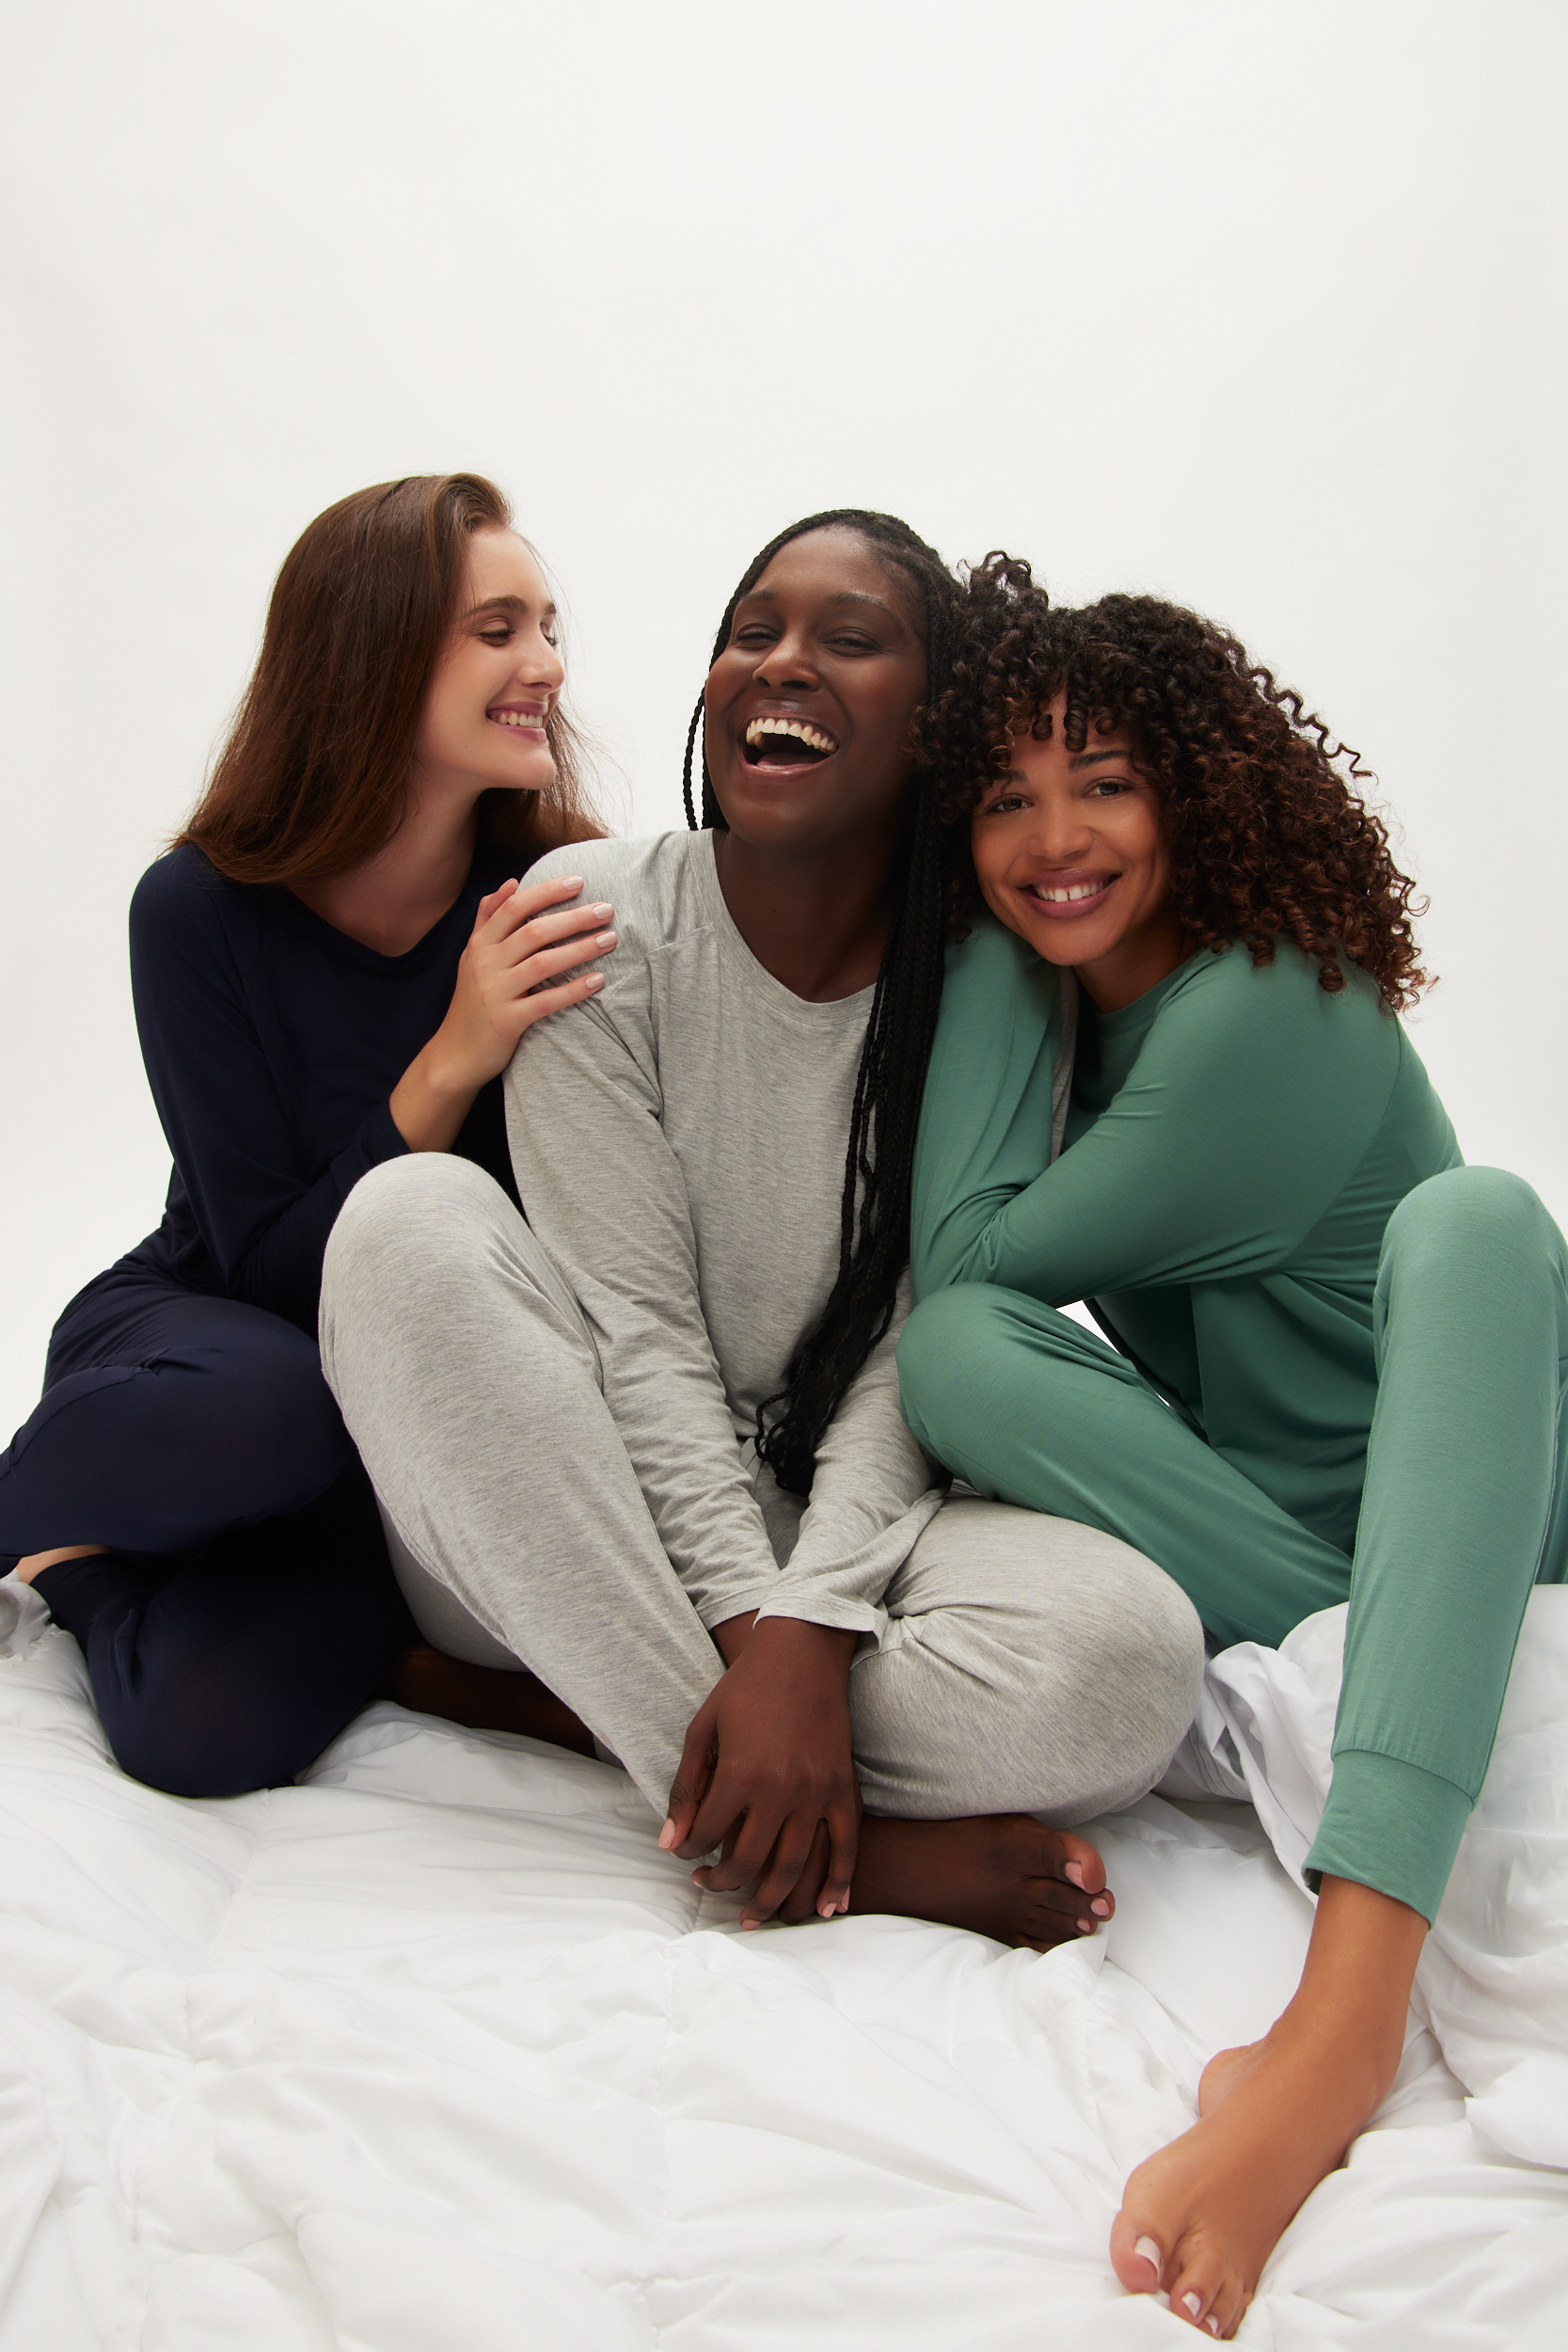 Macy's Inc.: Macy's and Gap Launch Sleepwear and Intimates Collections  Available Exclusively at Macy's - MoneyController (ID 1574781)